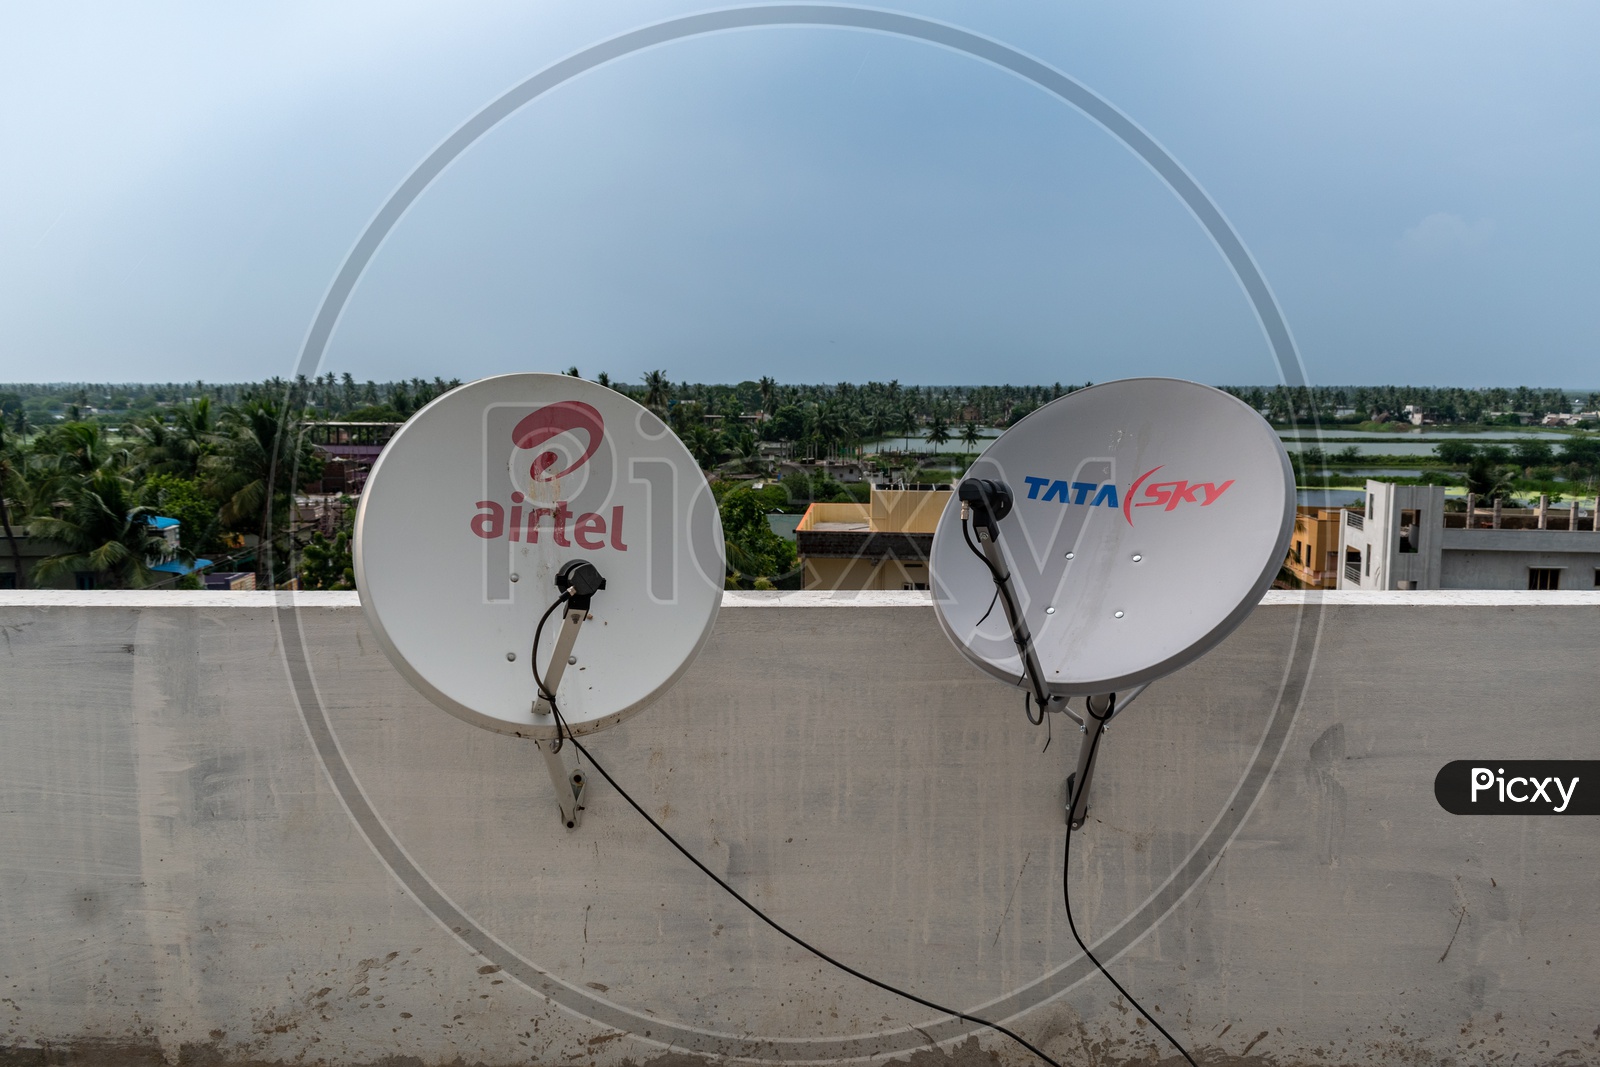 Airtel DTH dish and Tata Sky DTH dish installed on the terrace of a building.